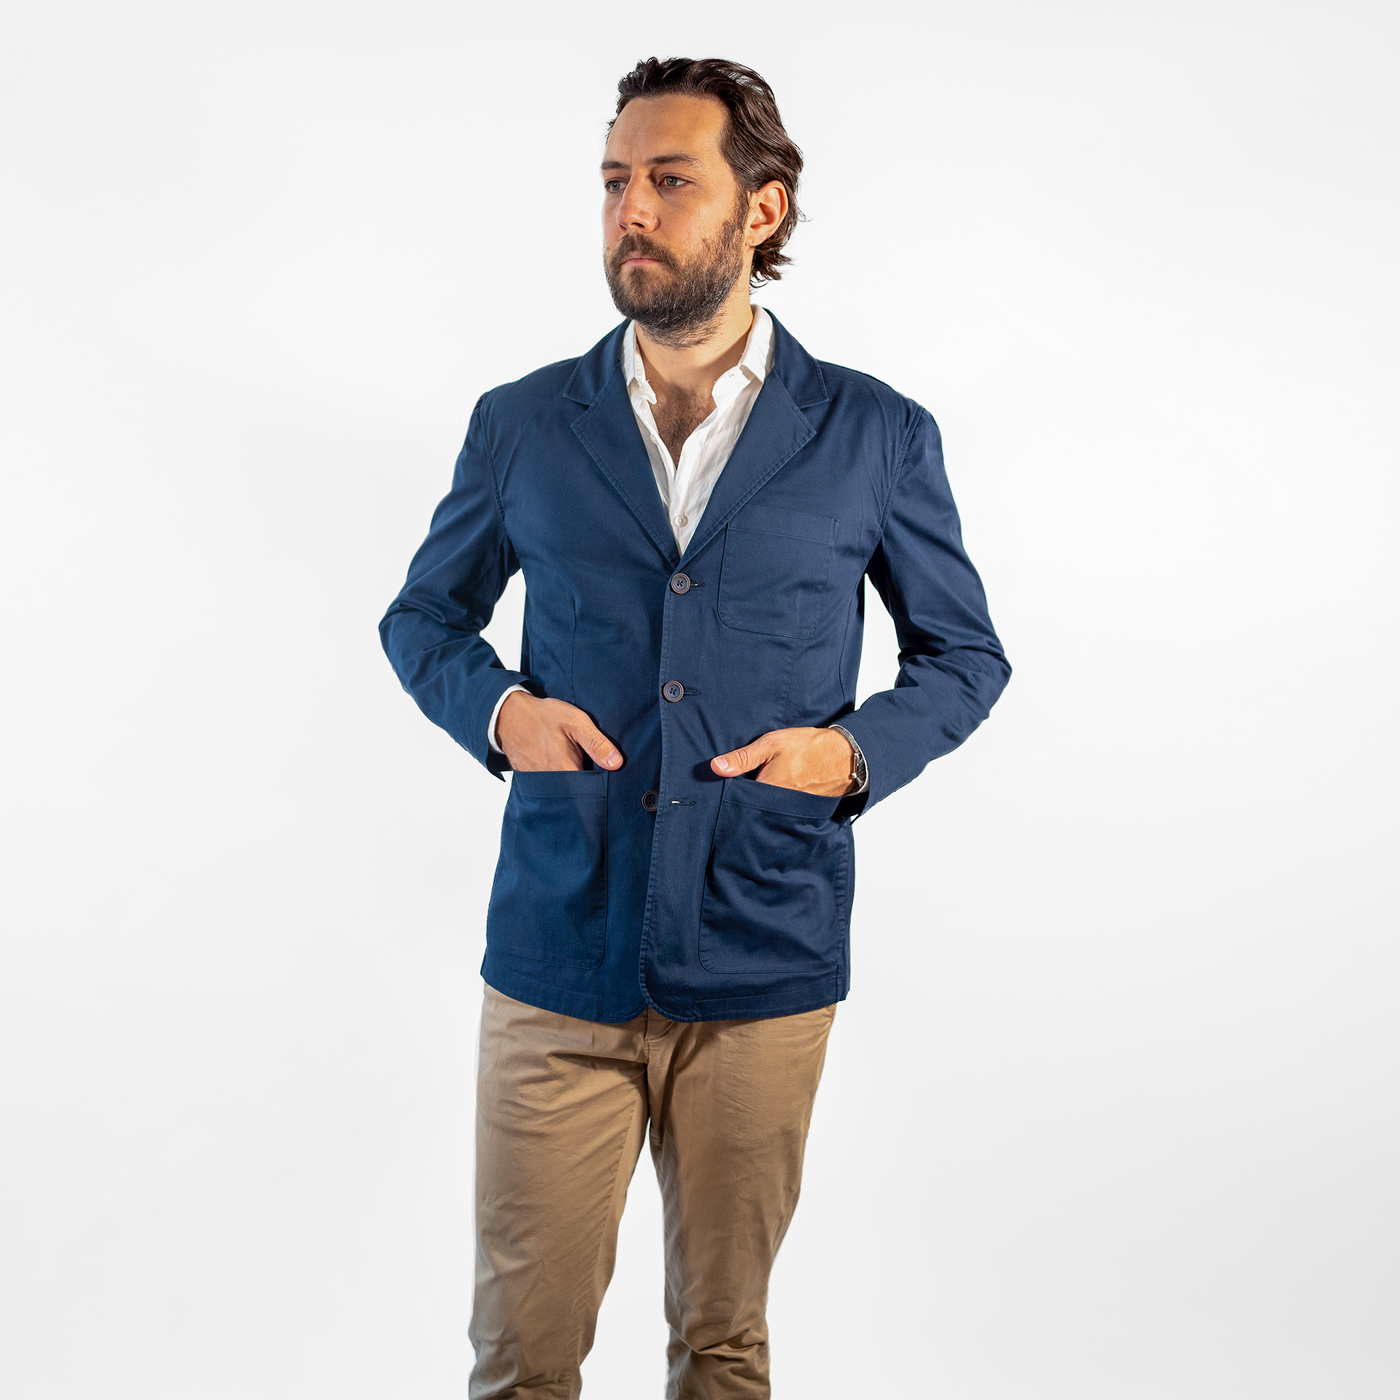 Navy casual jacket - The unstructured jacket